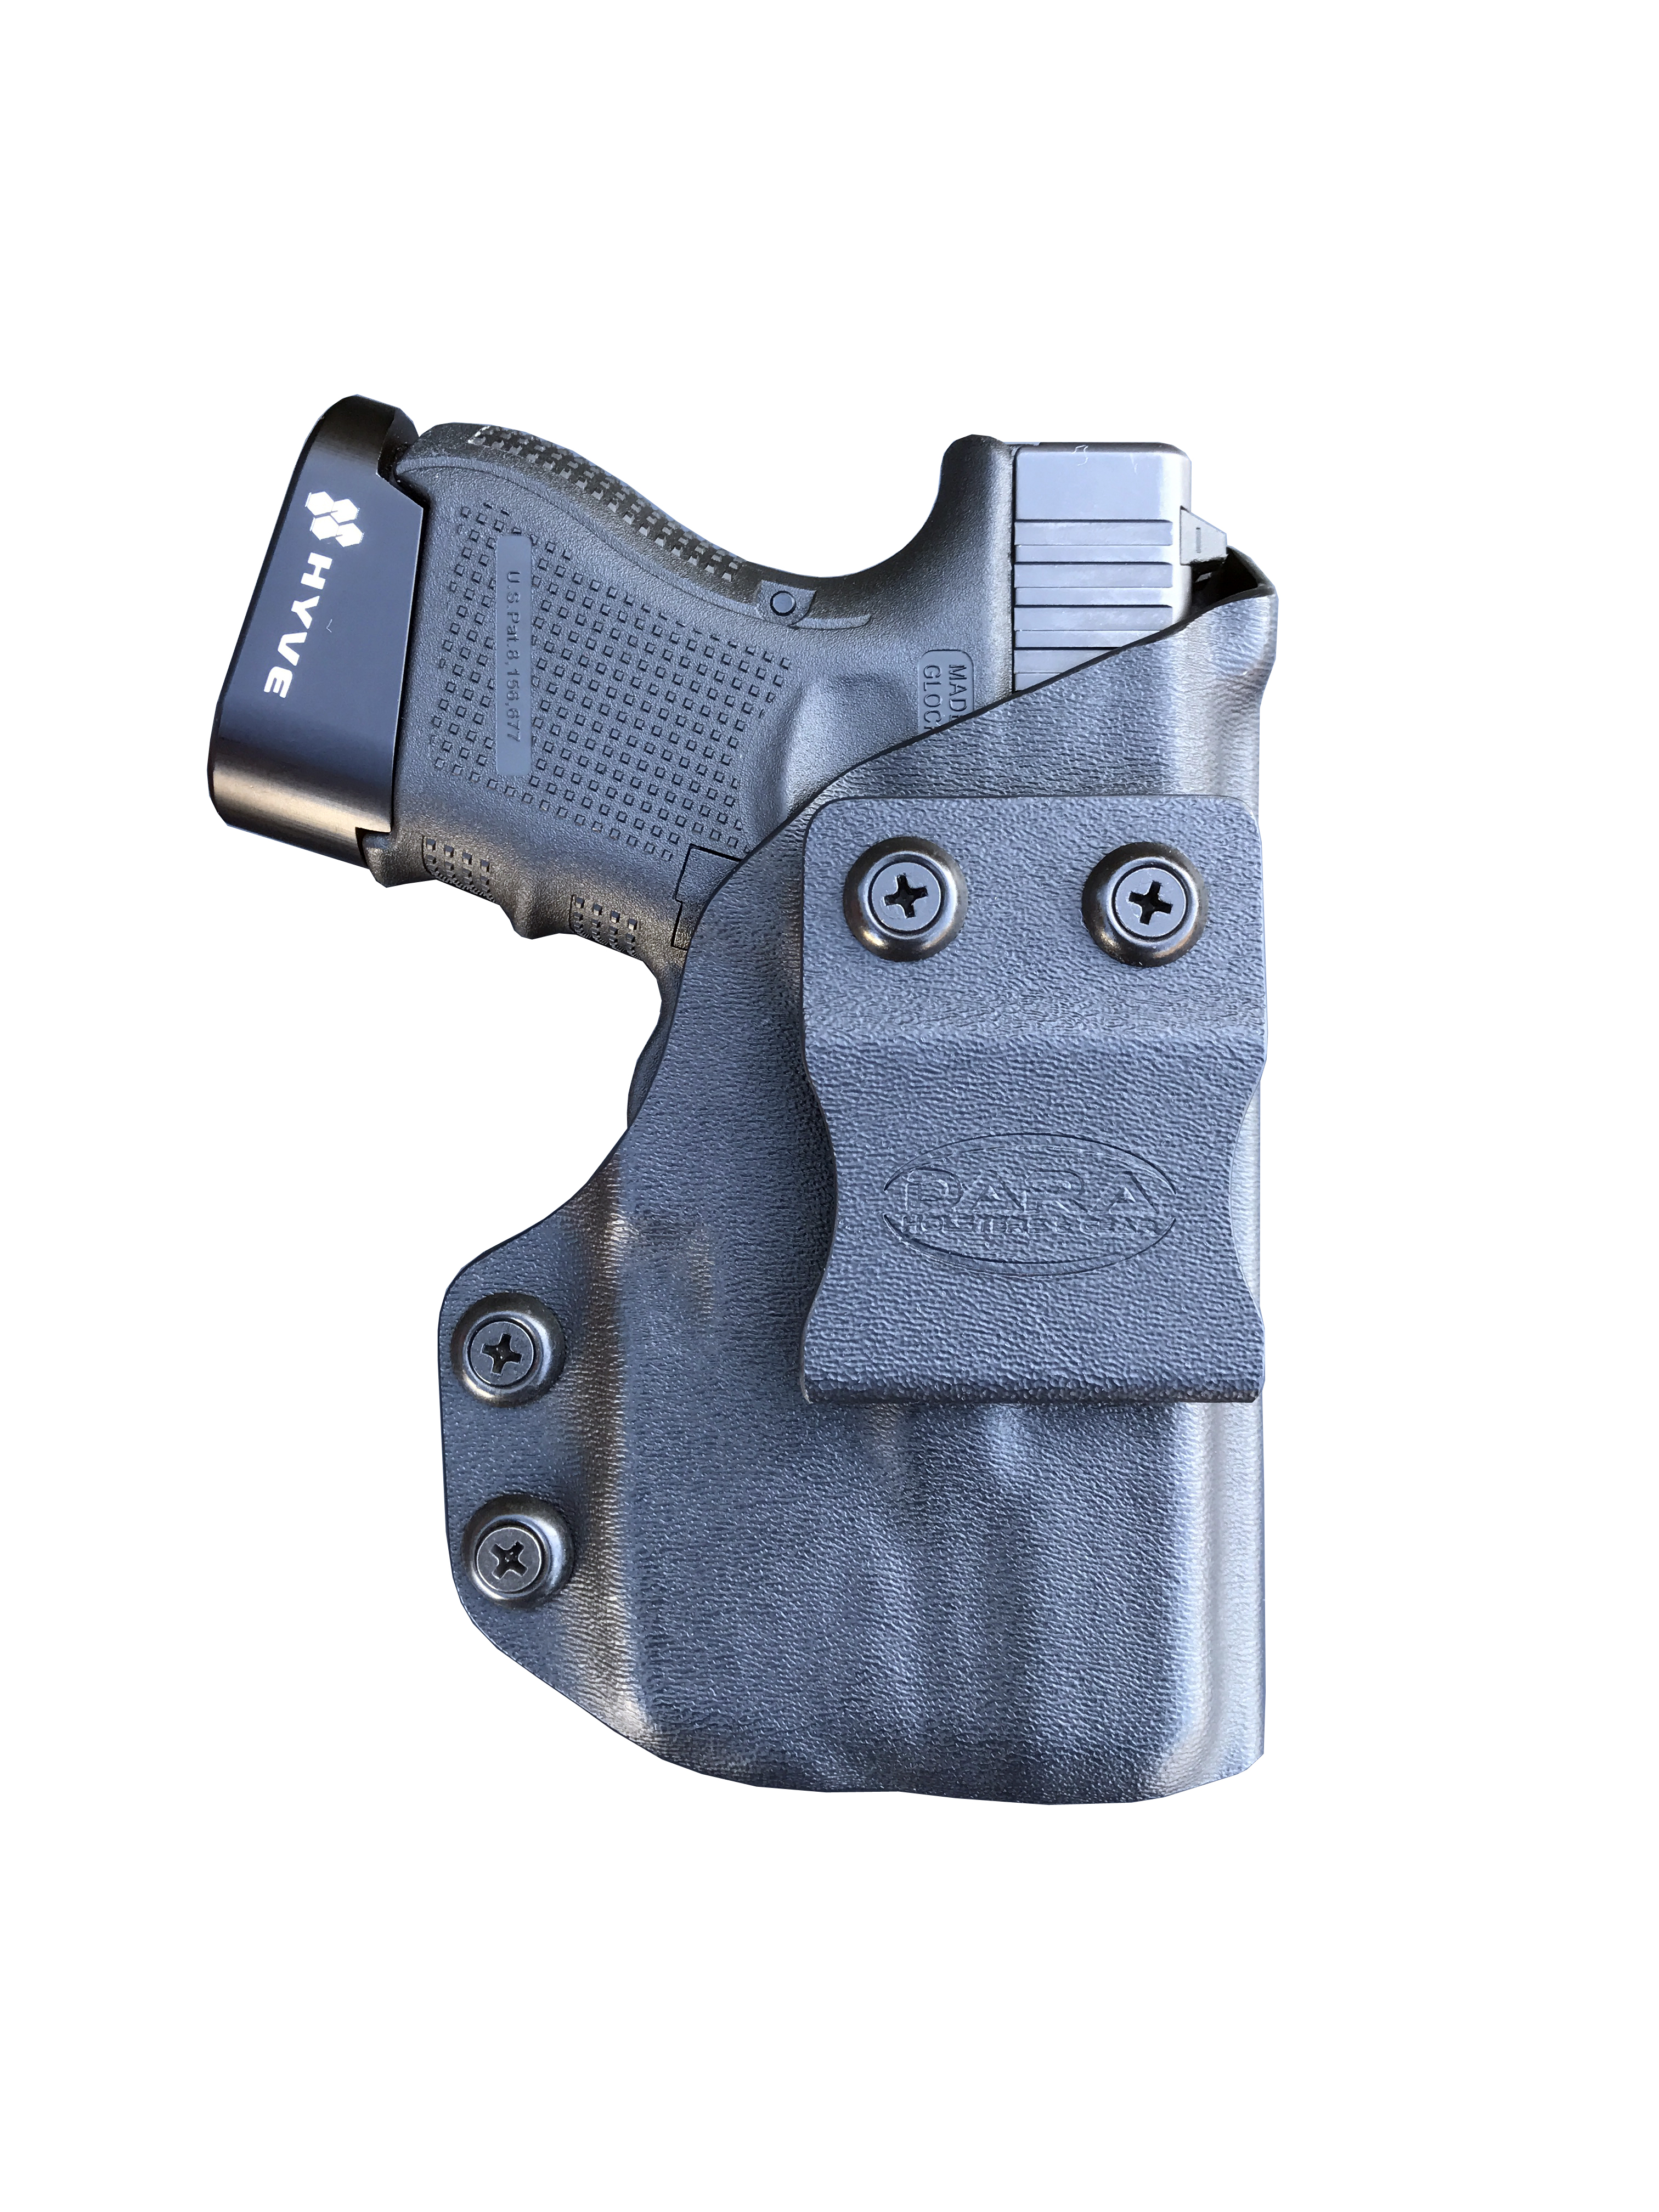 Glock 26 with TLR-6 IWB Holster